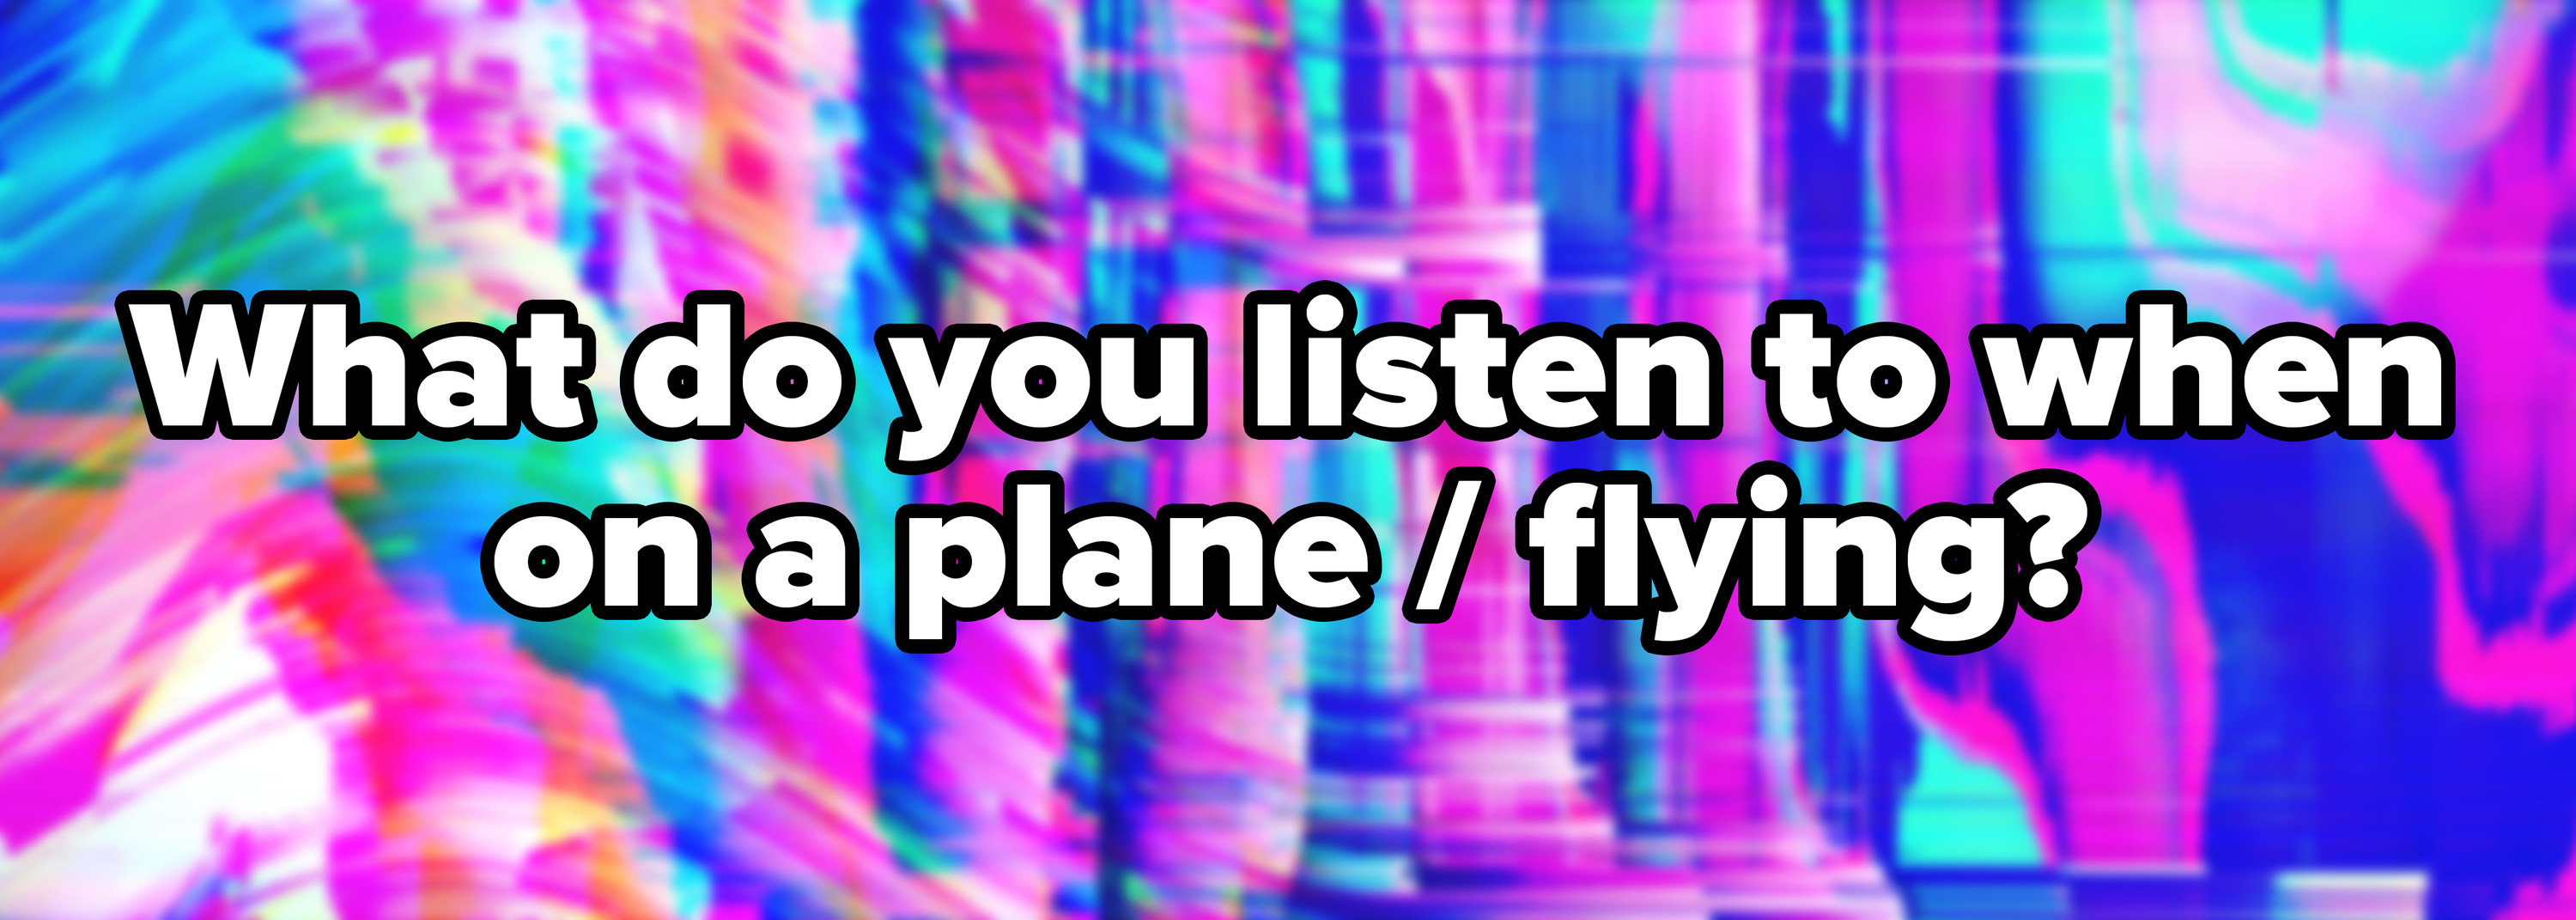 Abstract pink blue psychedelic background with the text What do you listen to when on a plane flying written on top